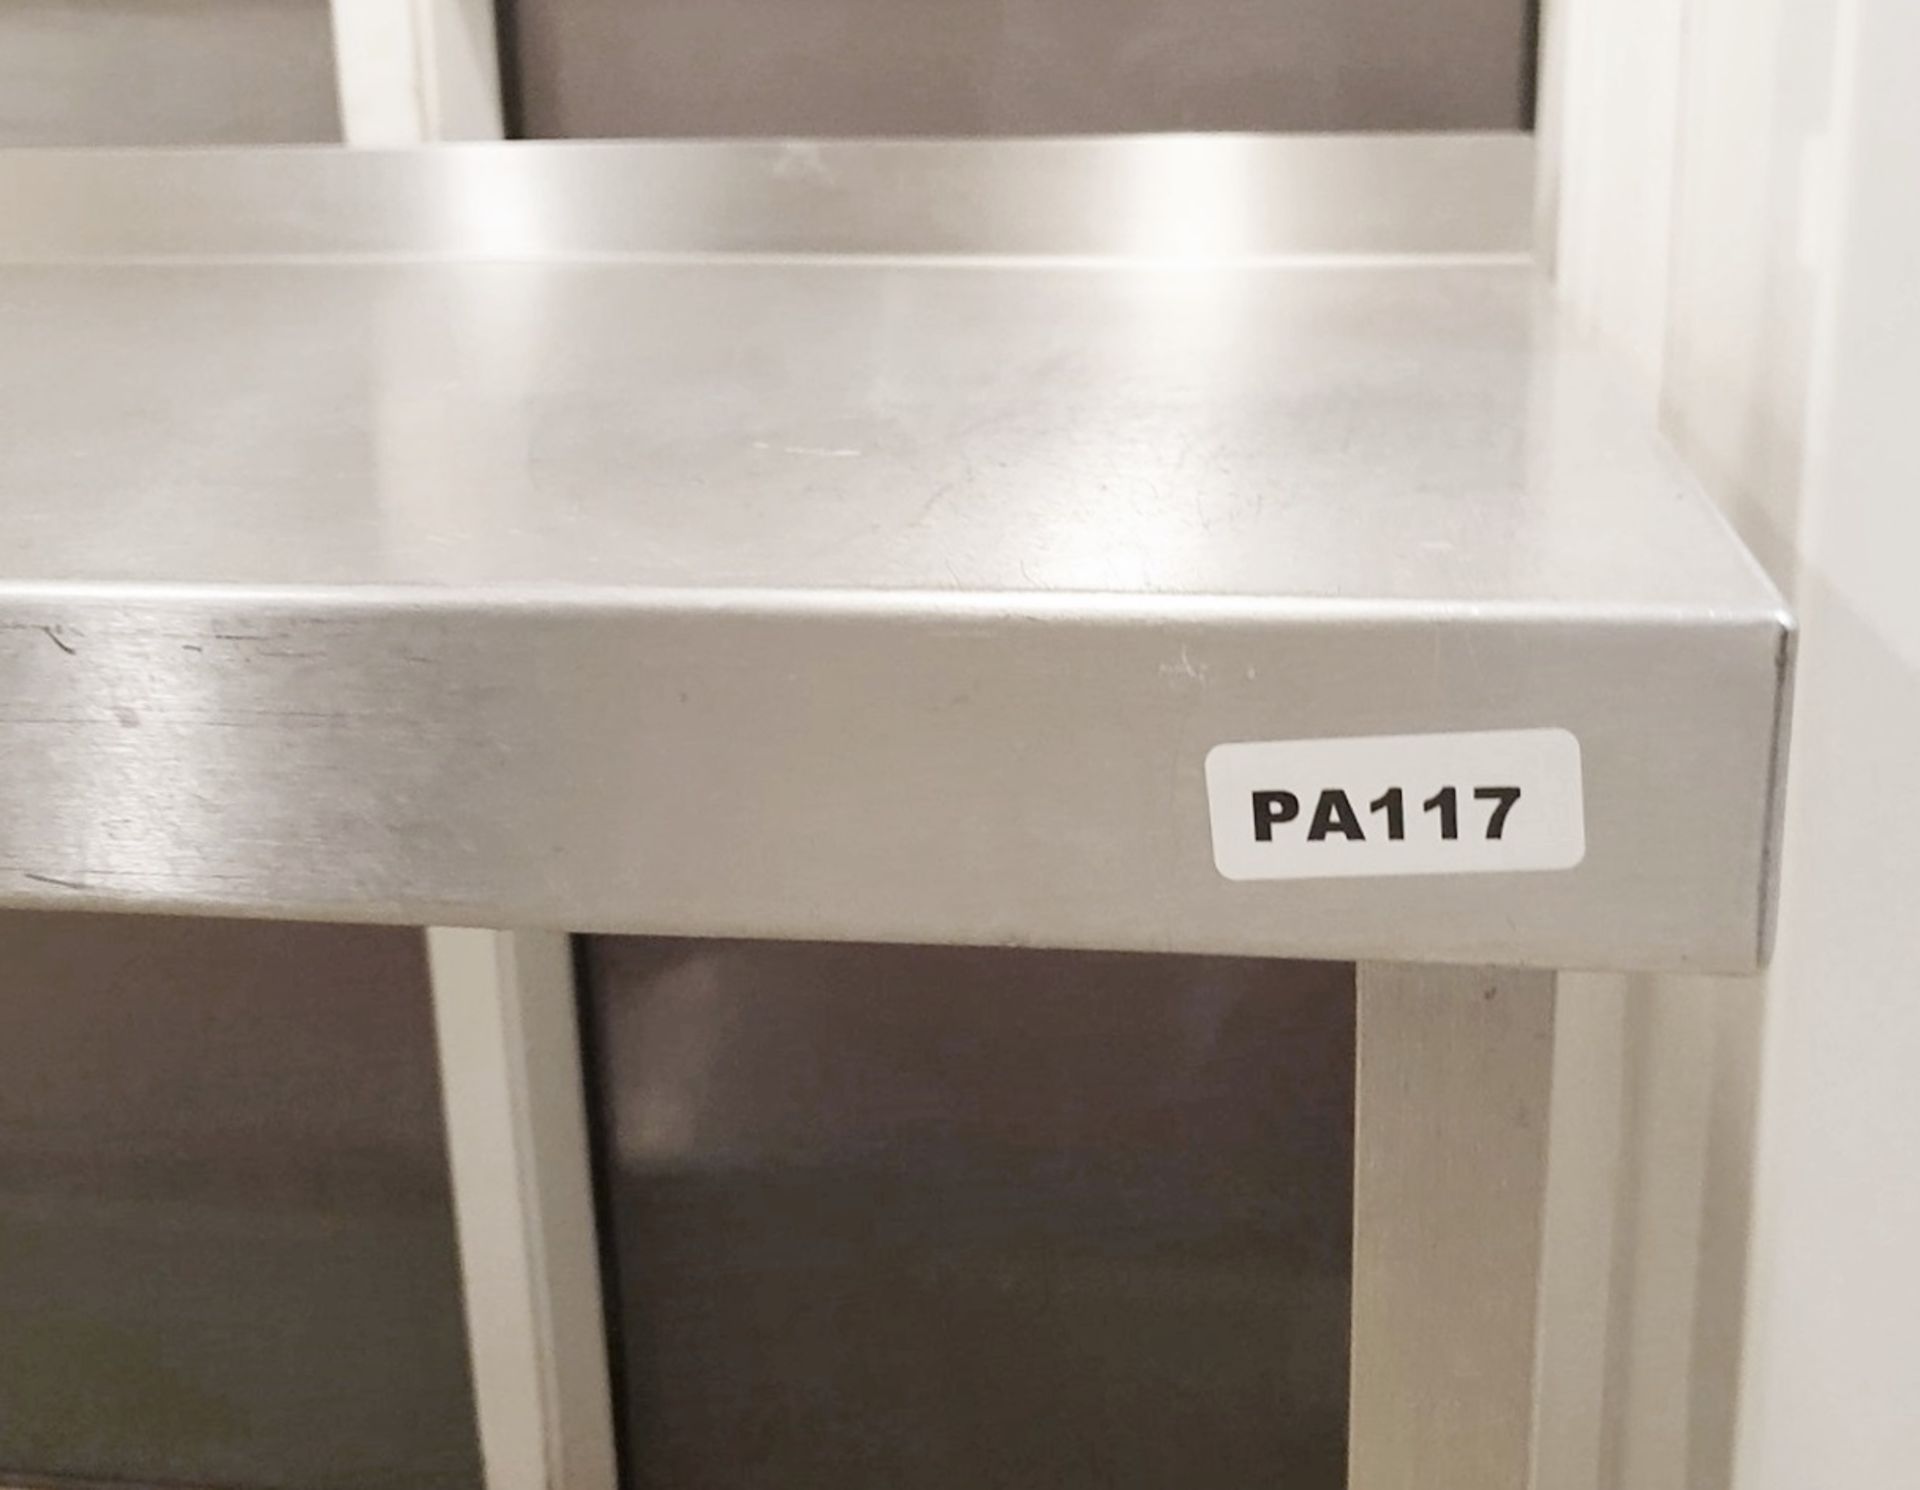 1 x Stainless Steel Preparation Bench With Upstand, Undershelf and Castor Wheels - Ref PA117 - H87 x - Image 2 of 2